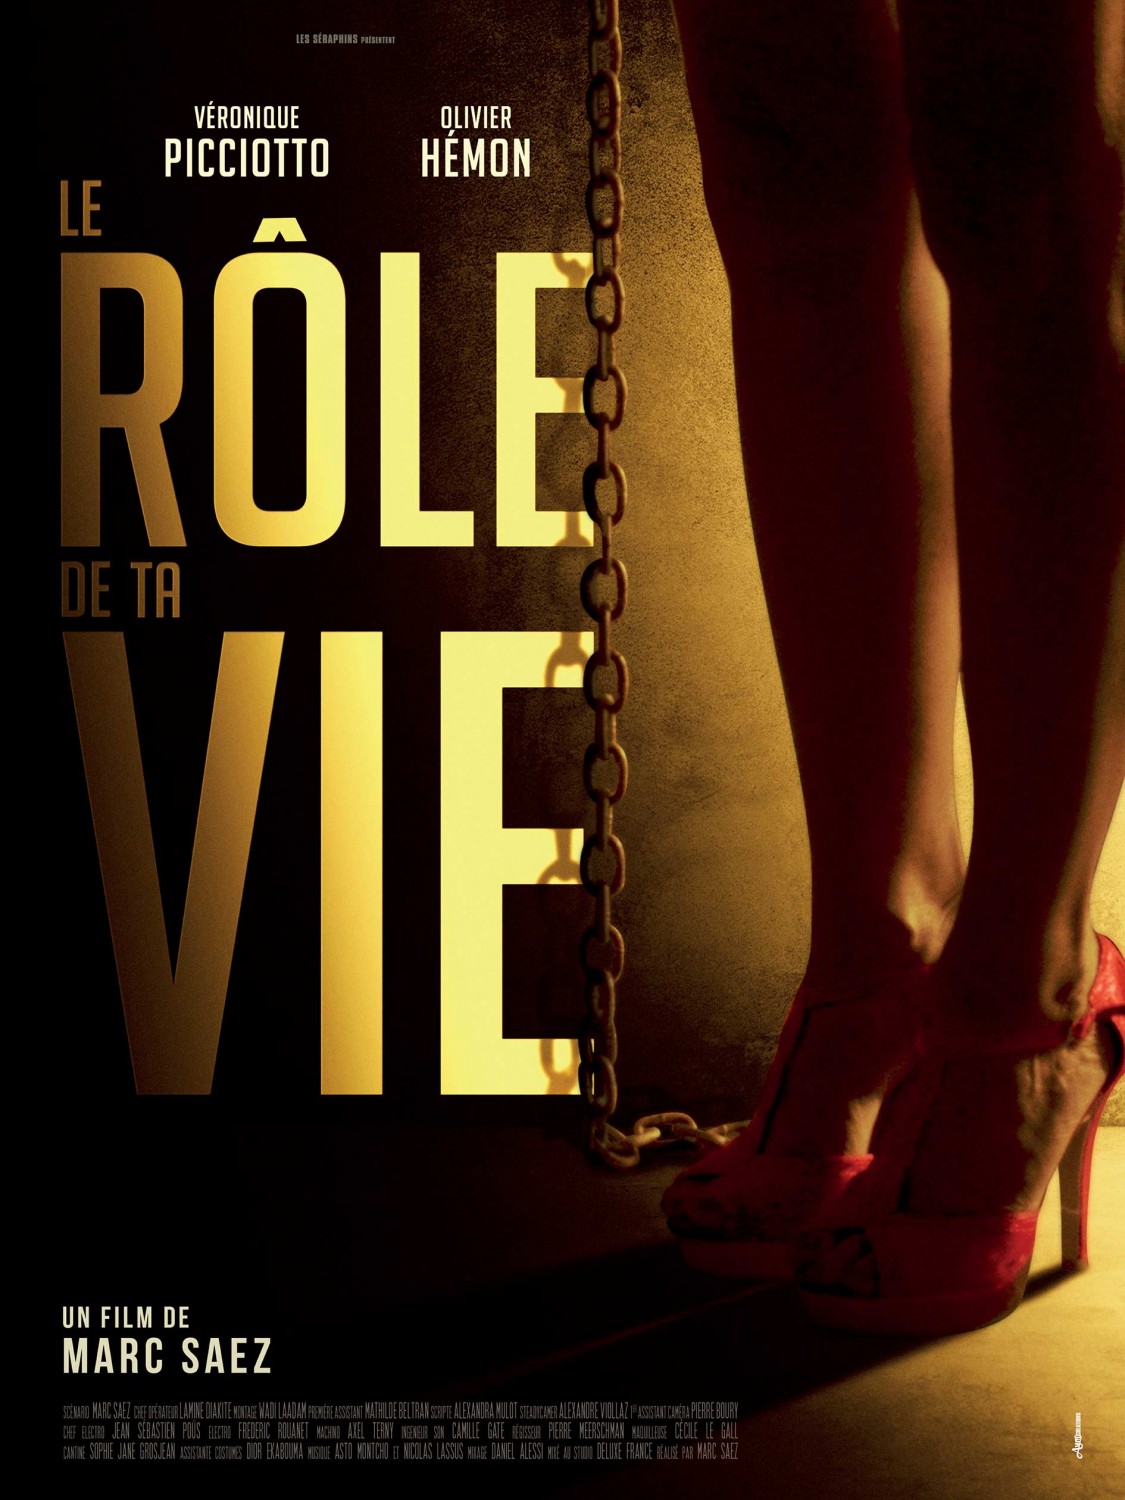 Extra Large Movie Poster Image for Le rle de ta vie